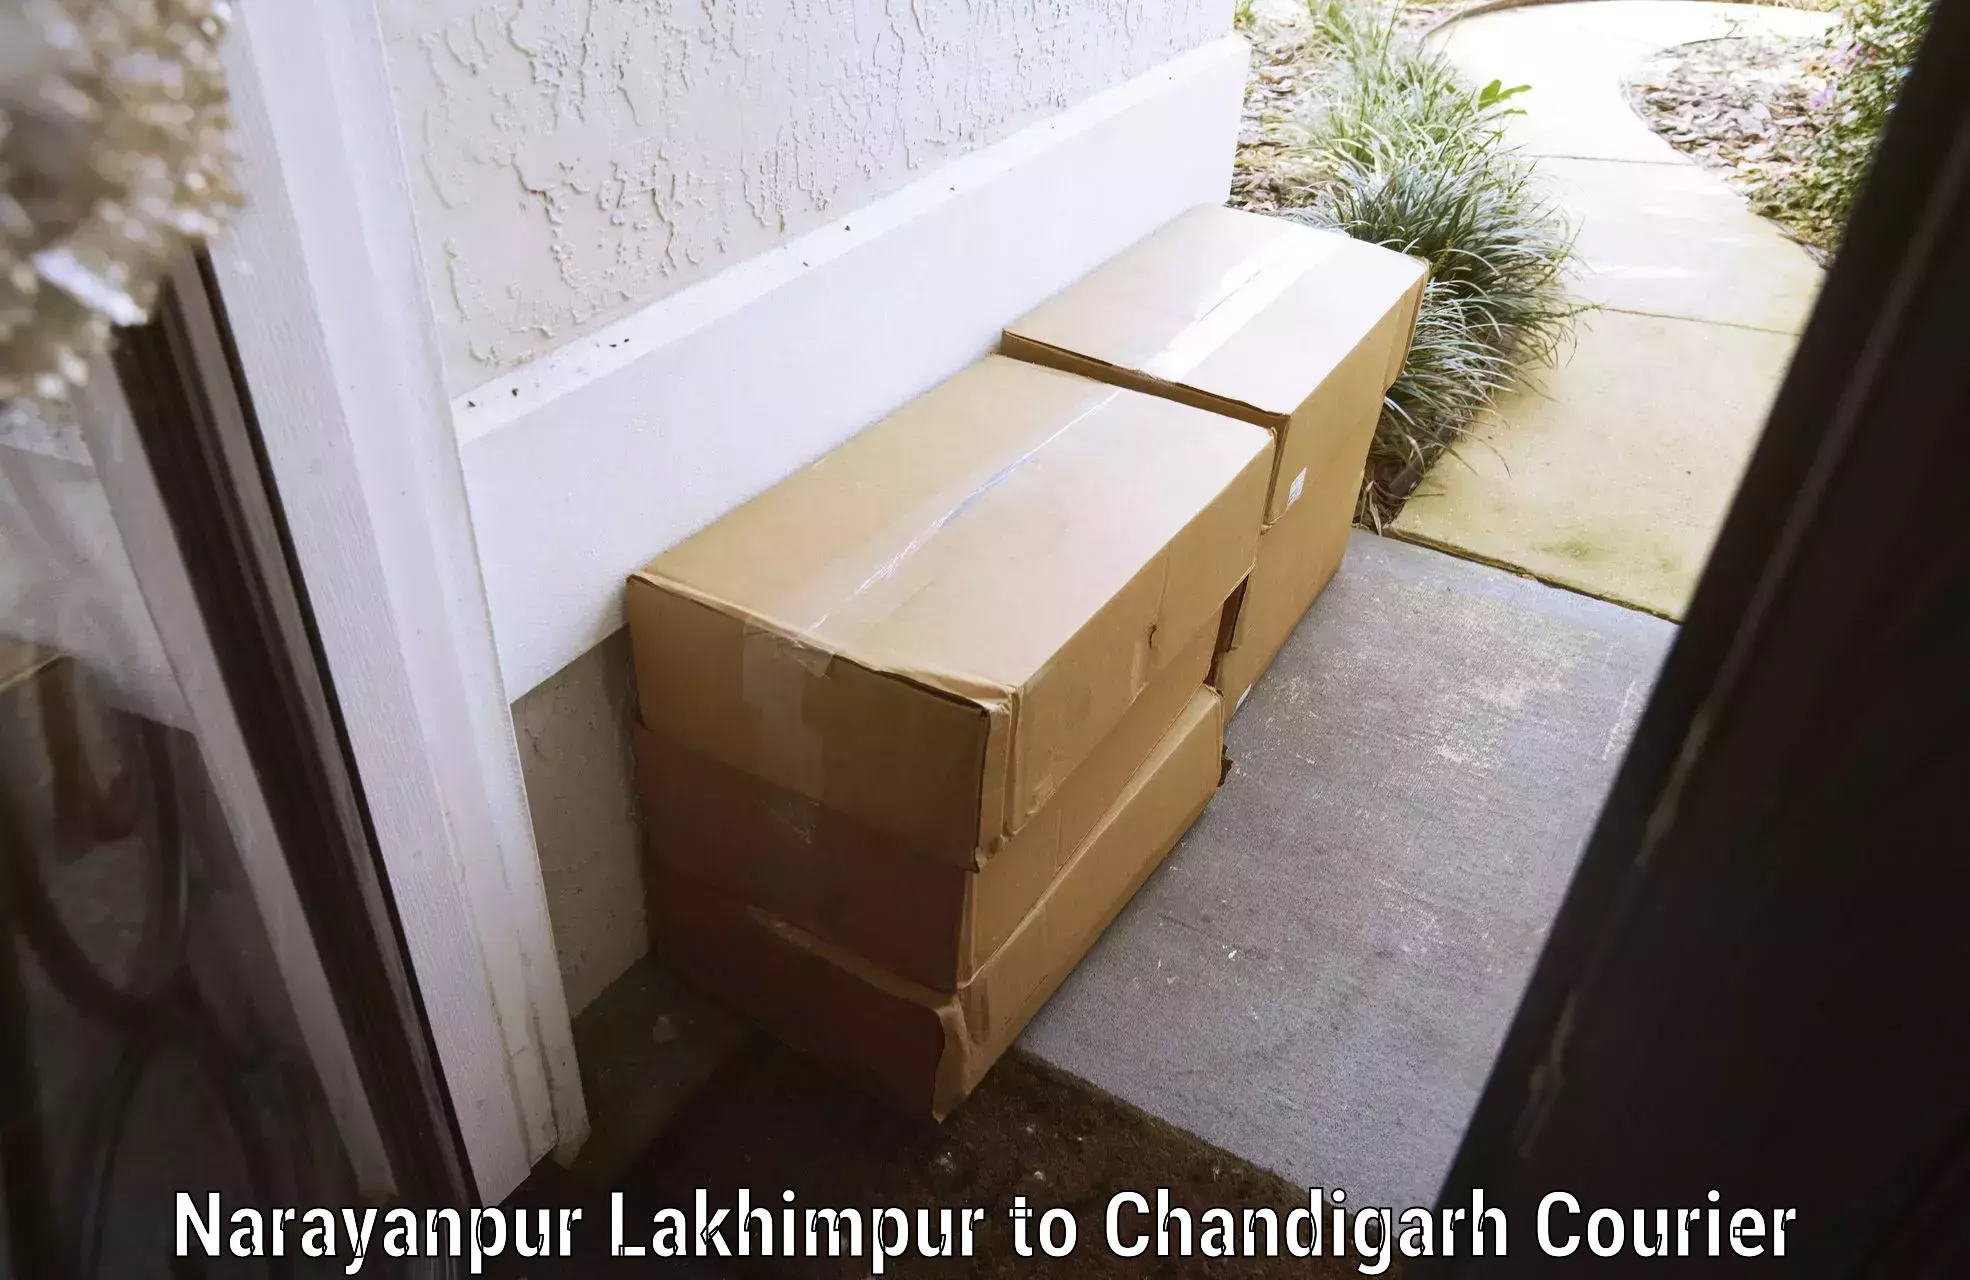 Baggage courier FAQs Narayanpur Lakhimpur to Chandigarh